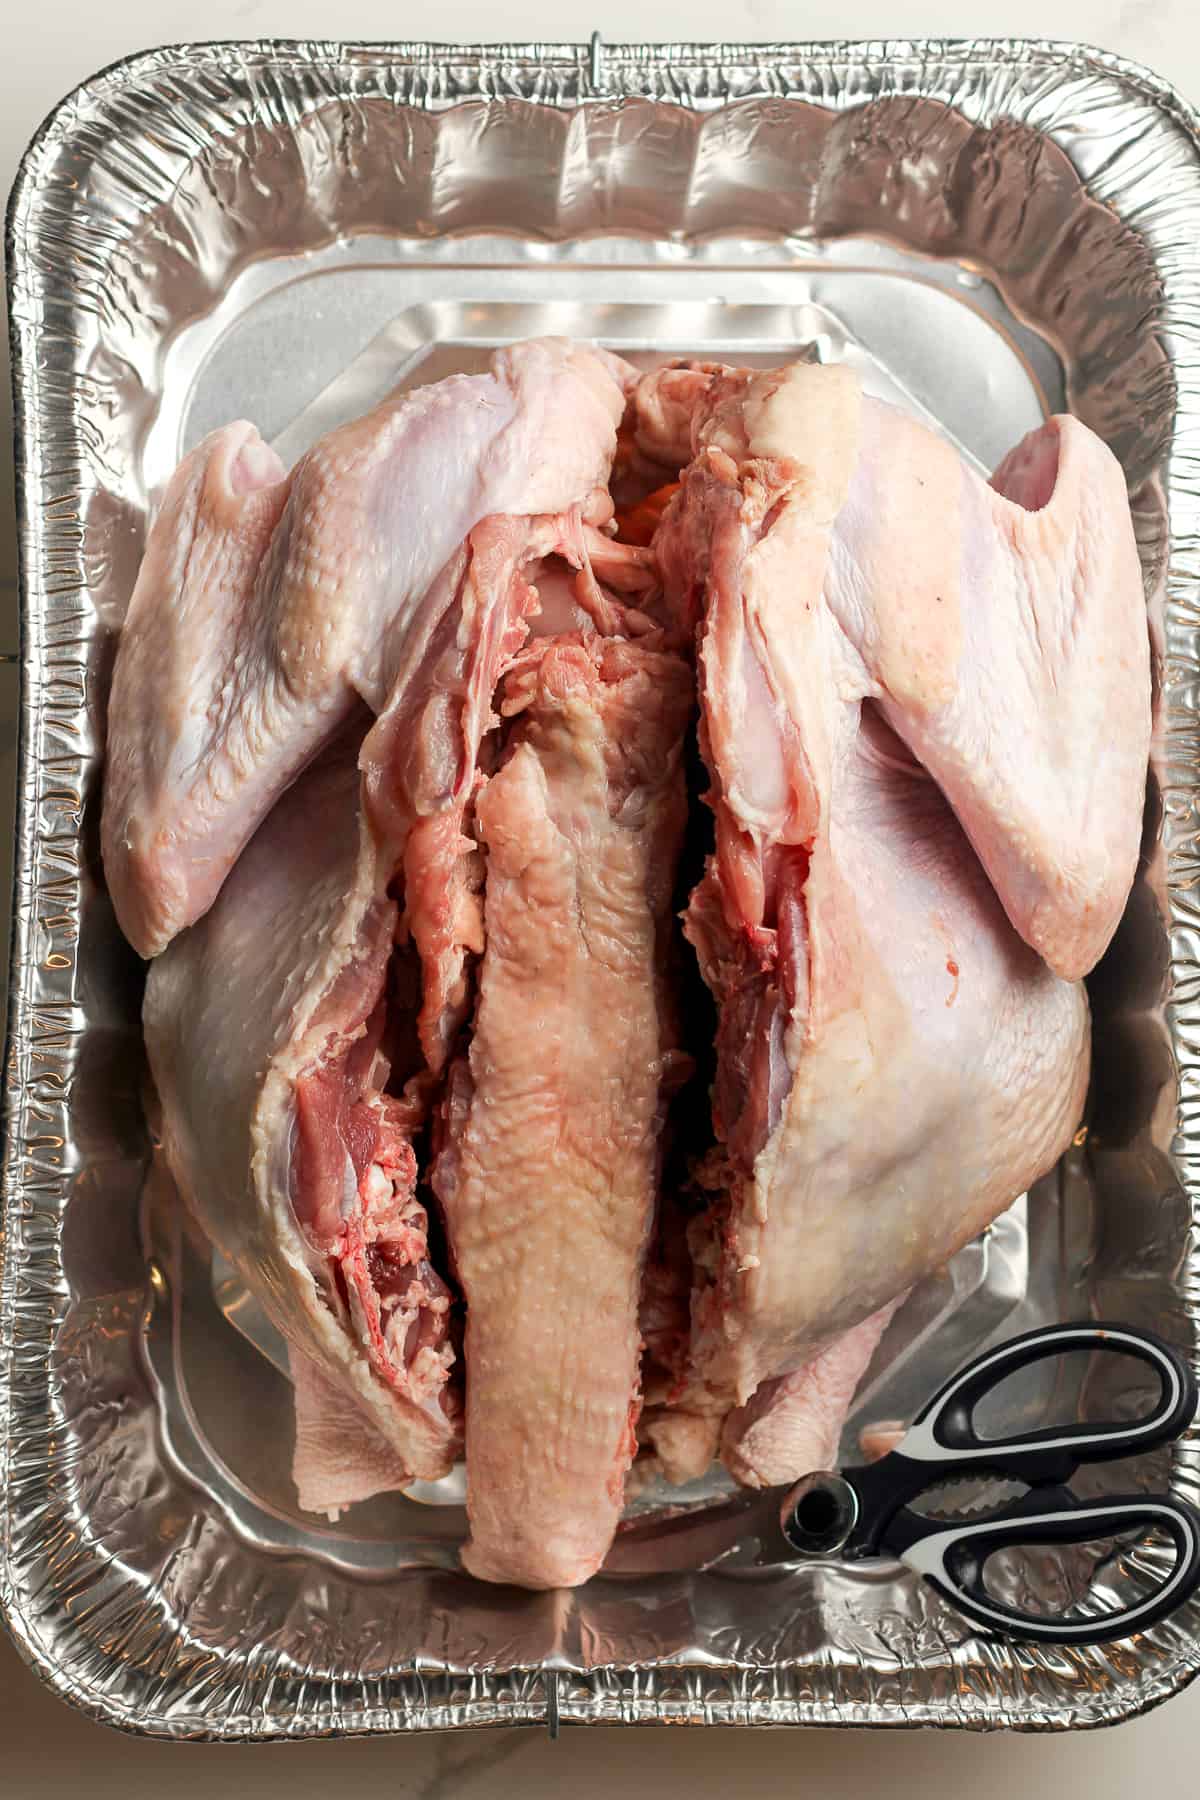 The turkey with the backbone removed.